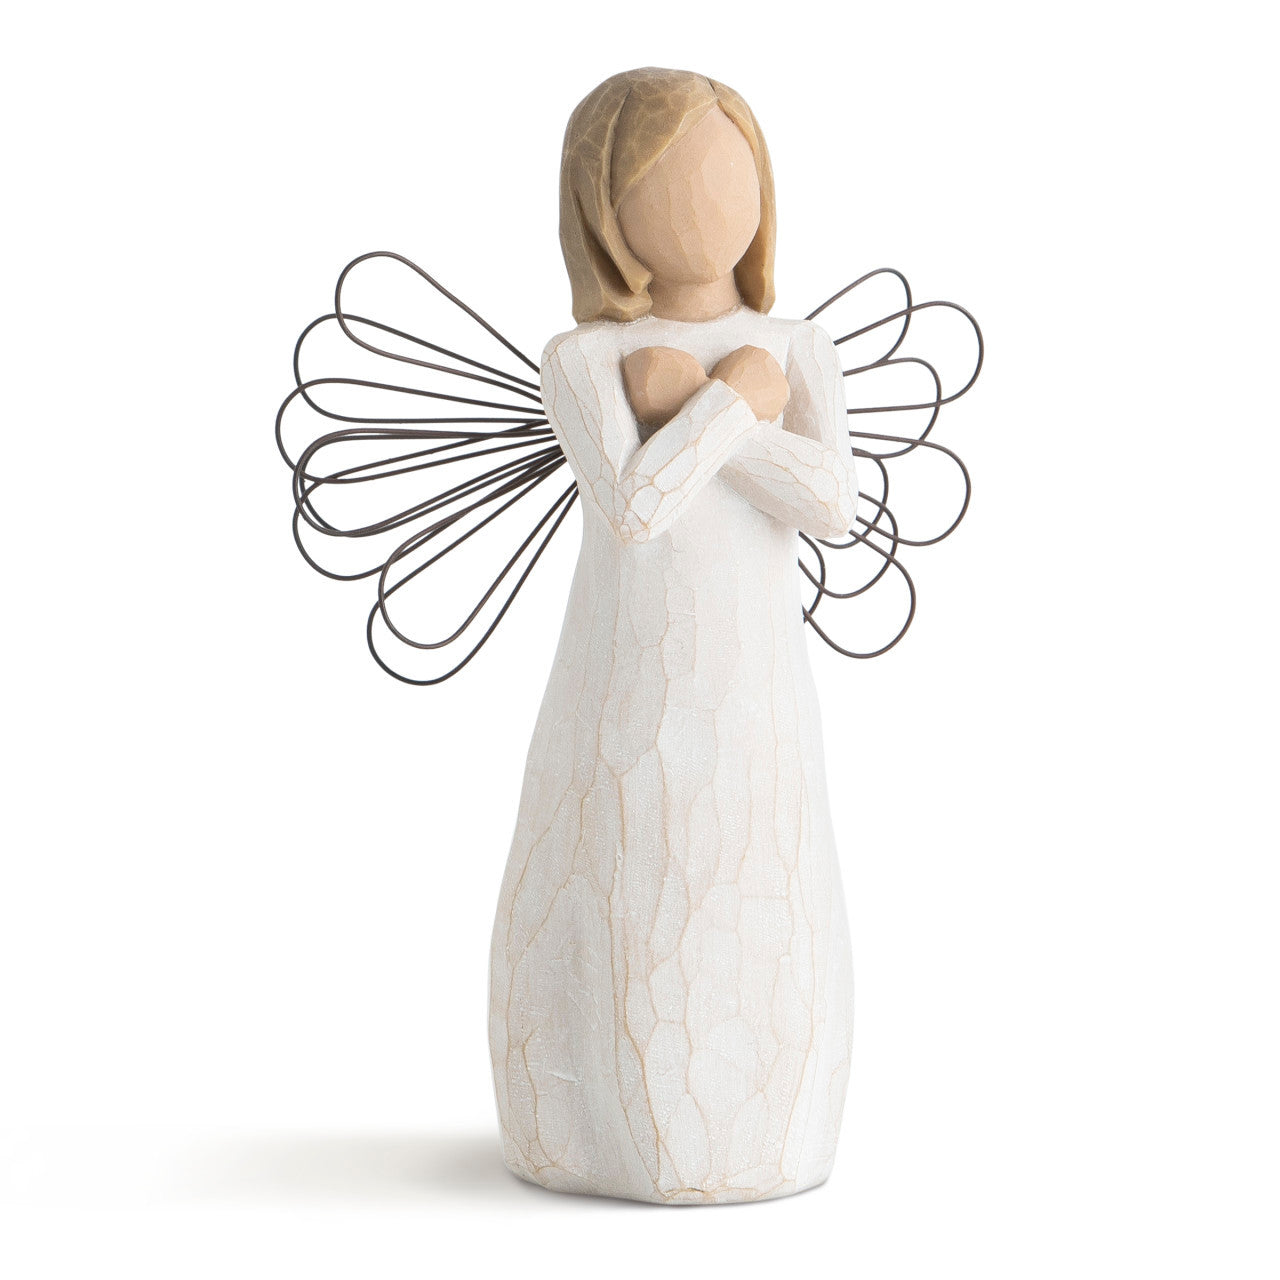 Willow Tree® Sign For Love Figurine by Demdaco Figurine Willow Tree   